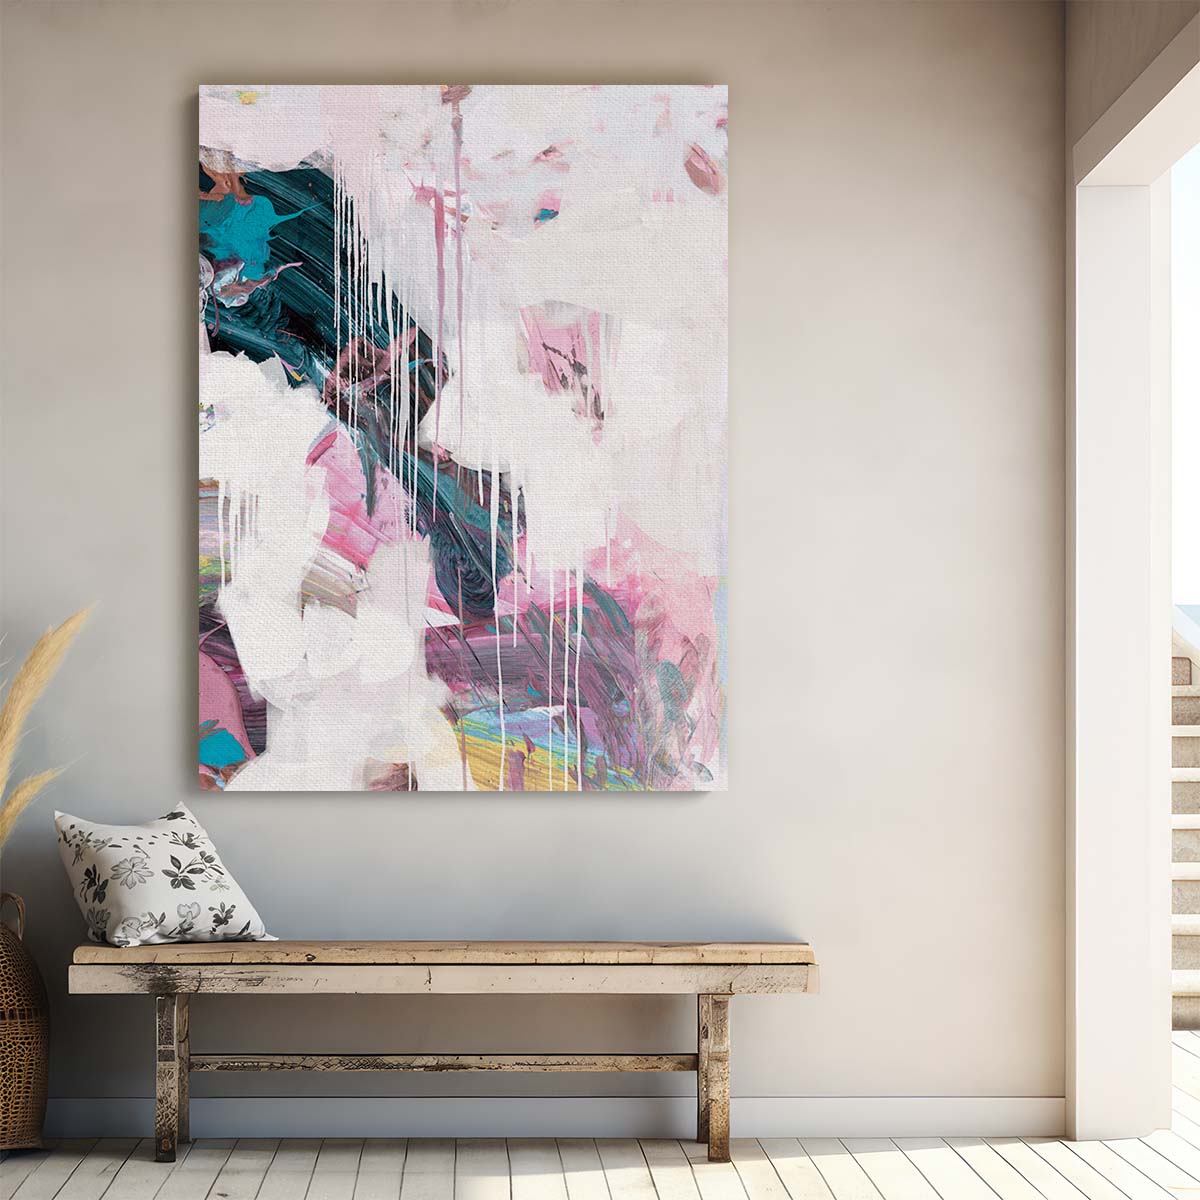 Contemporary Minimalistic Abstract Illustration in Colorful Brush Strokes by Luxuriance Designs, made in USA